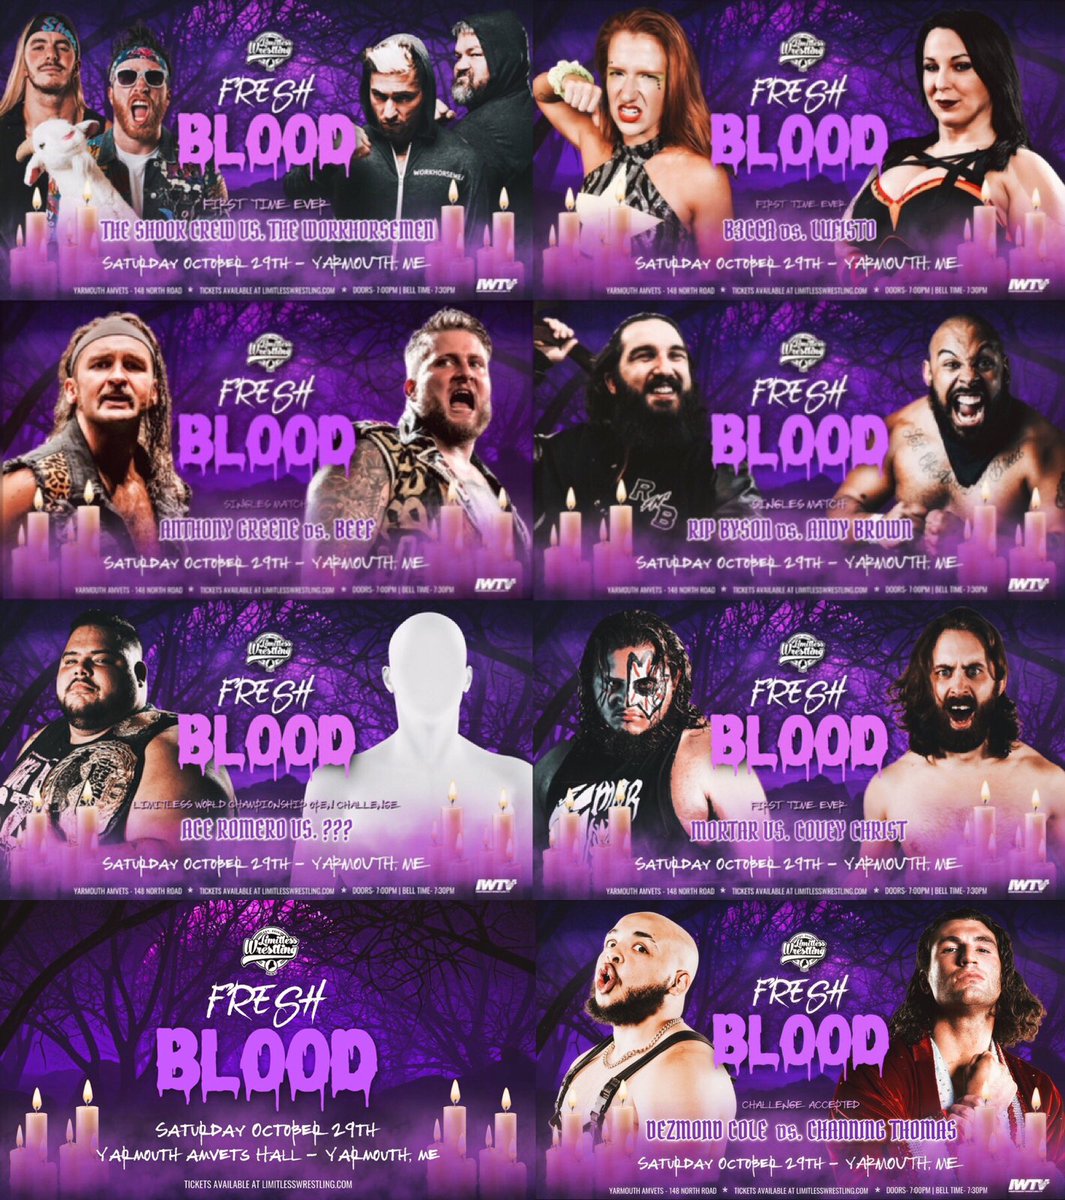 #FreshBlood is 1 WEEK AWAY‼️ One of the final Limitless Wrestling events of 2022! Saturday, Oct 29th • Yarmouth, ME 📺 Streaming LIVE on @indiewrestling! • @LuFisto v. @b3cca4ever • @RipFNByson v. @UpAndyBrown • @alternative_ag v. @GNARLSGARVIN 🎟 LimitlessWrestling.com/tickets